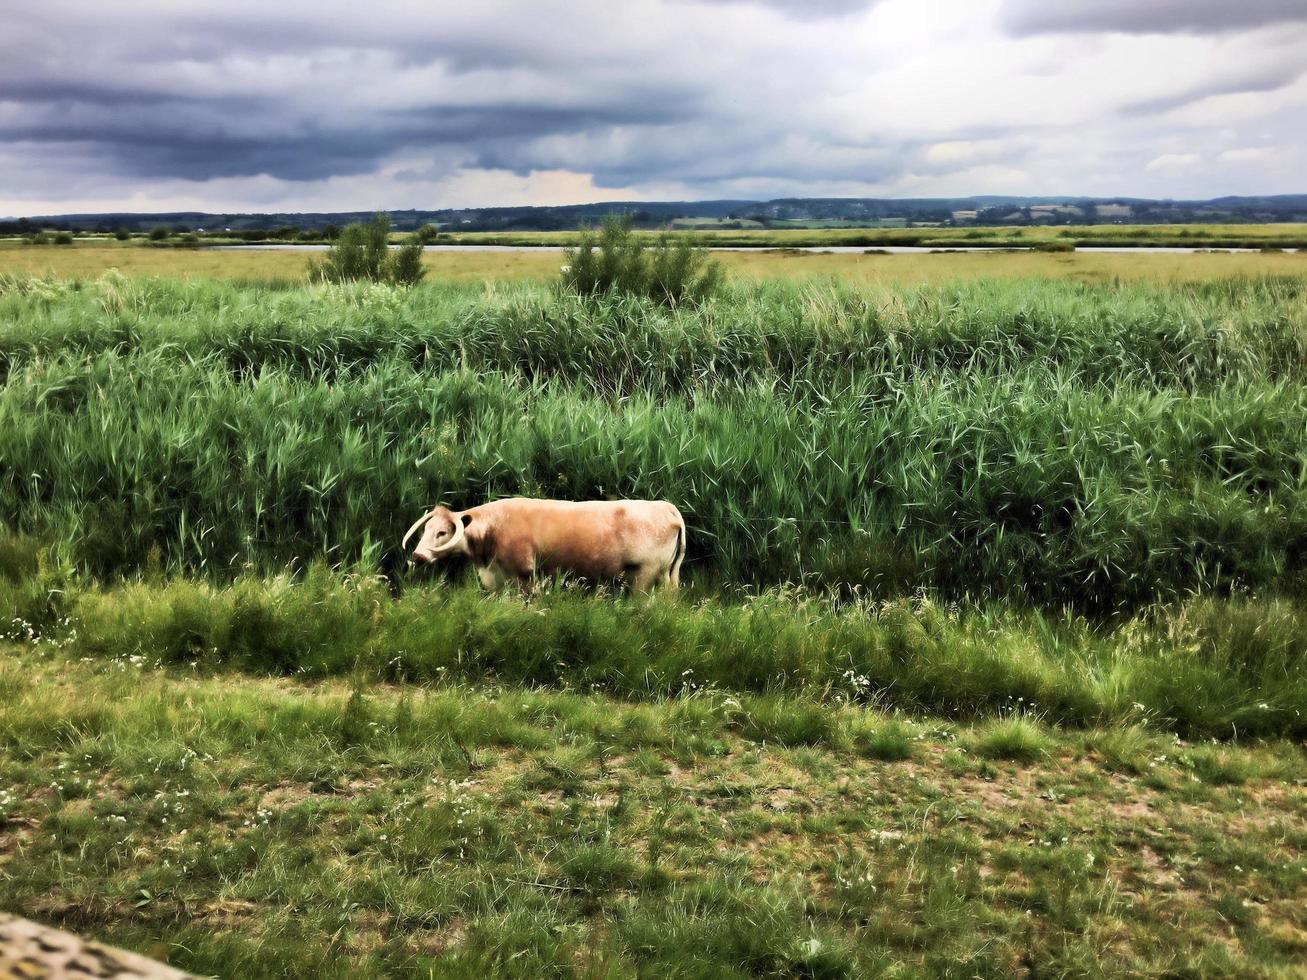 A view of a Cow in a field near Slimbridge in Gloucestershire photo